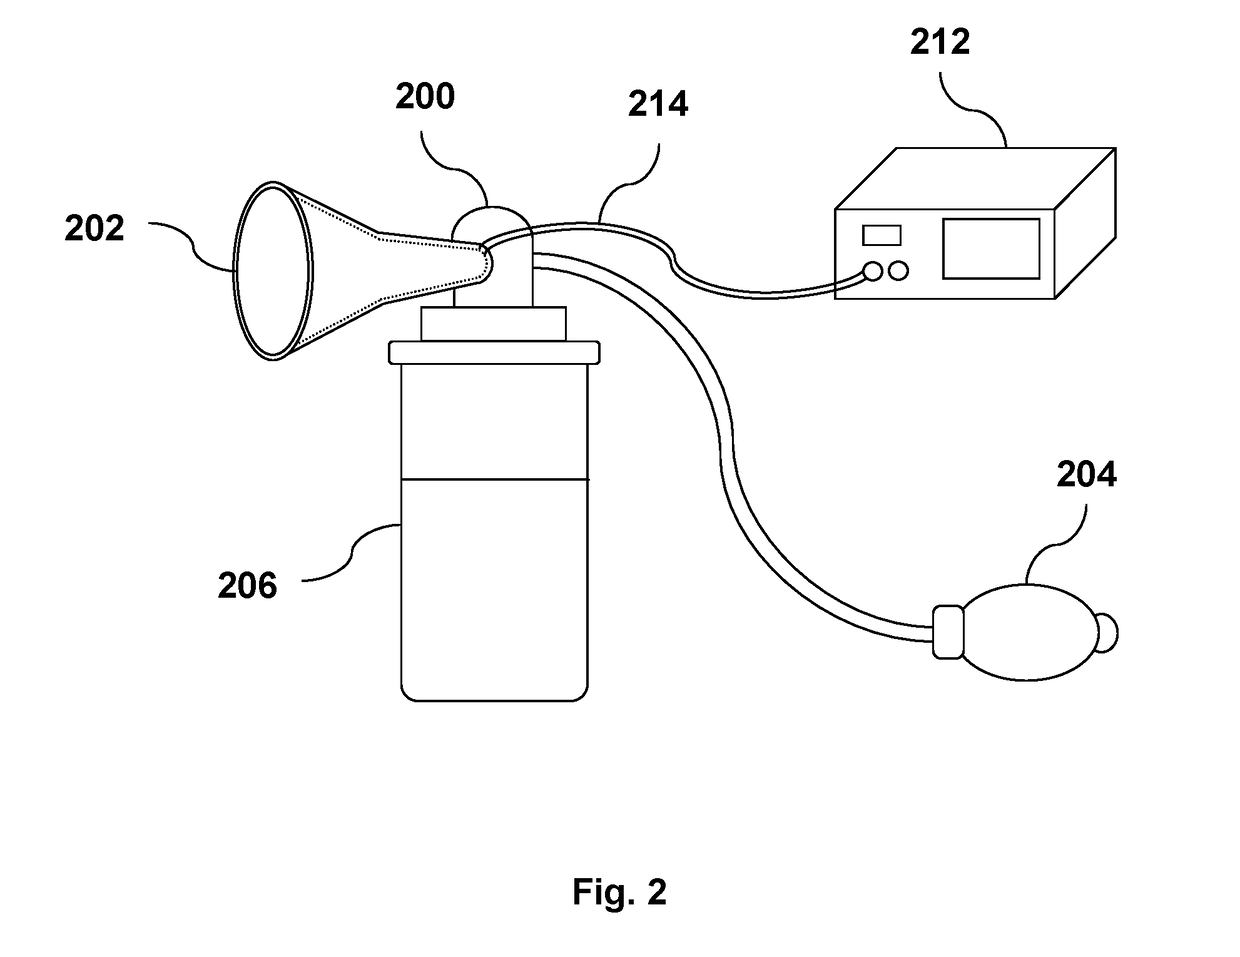 Apparatus for Improving Experience of Breastfeeding